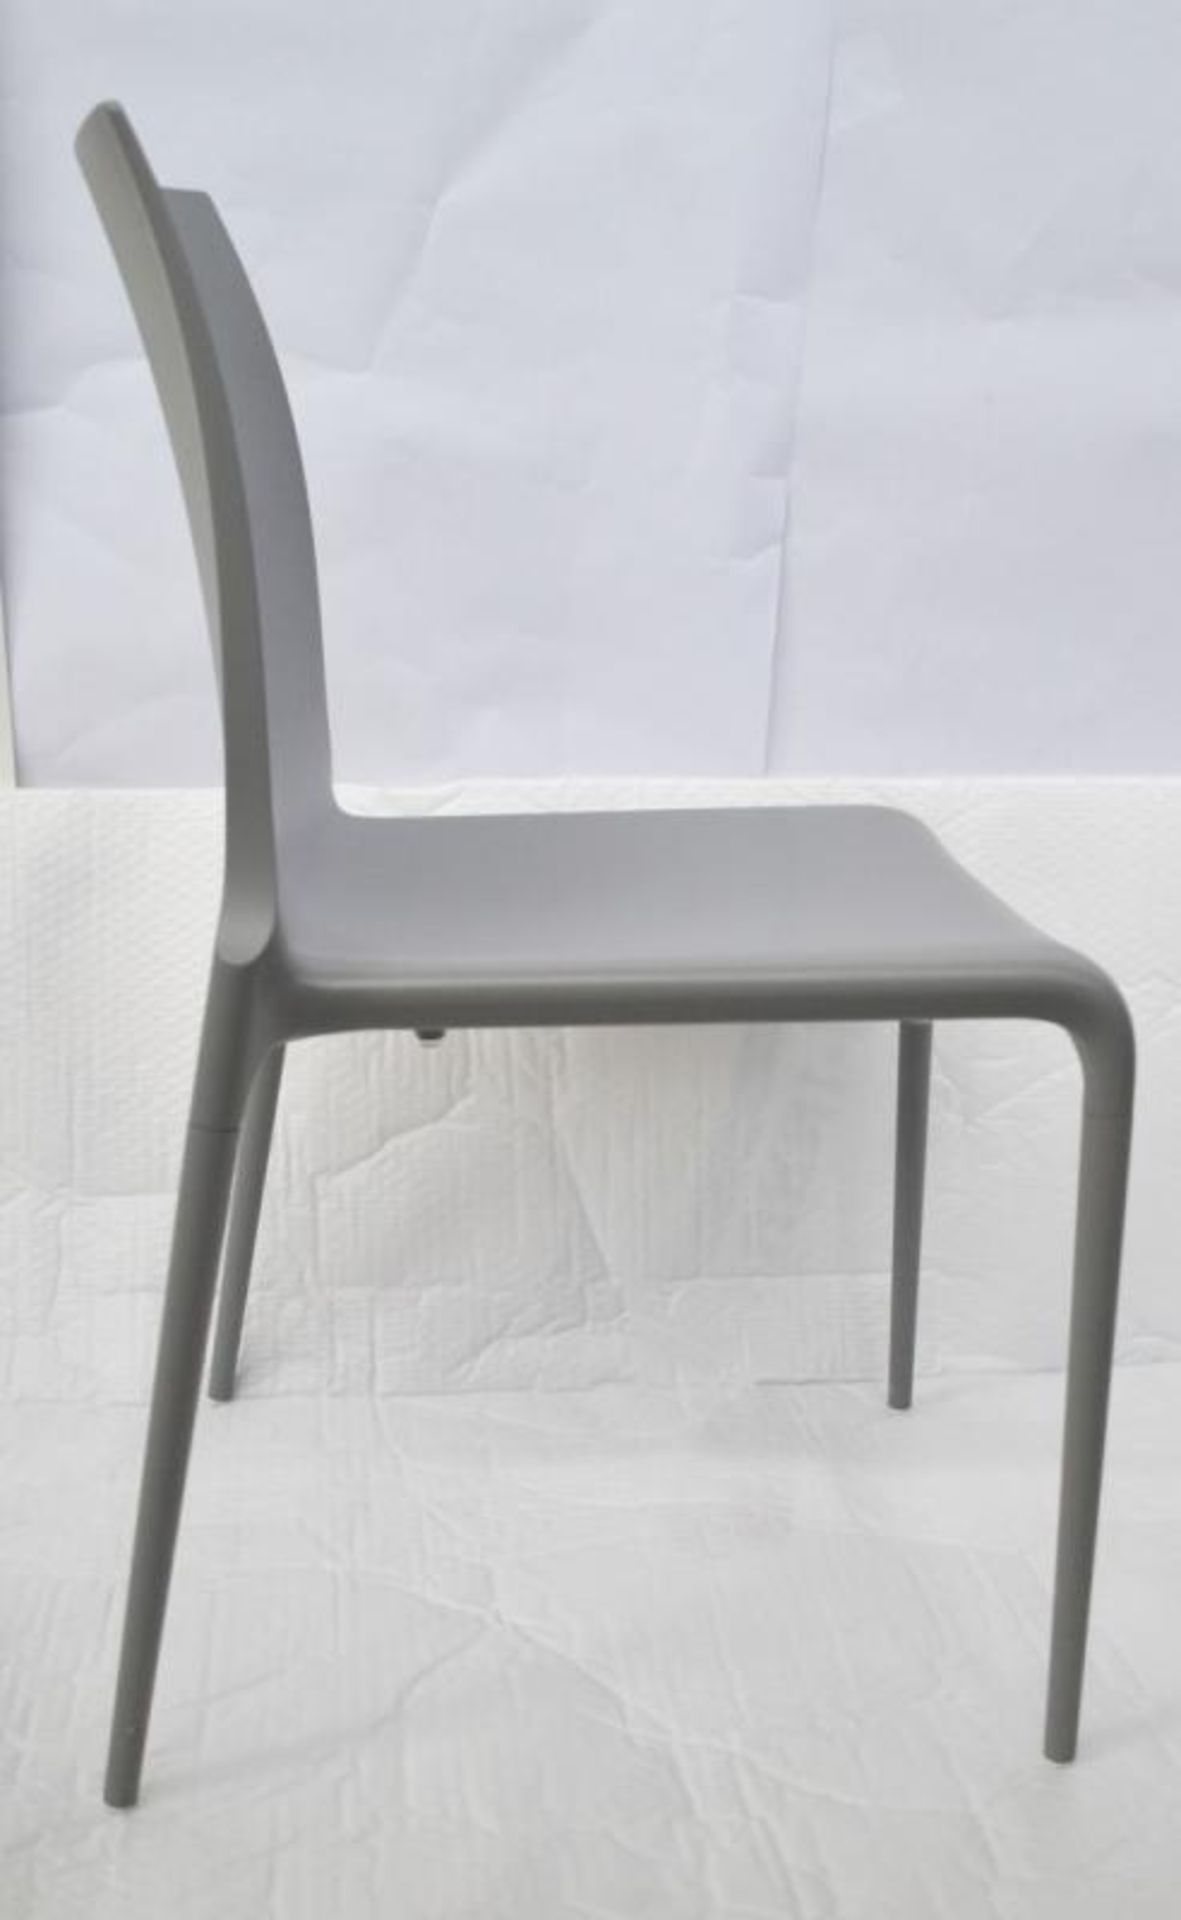 2 x LIGNE ROSET "Petra" Stackable Dining Chairs - Dimensions: W42 x D45 x H83, Seat Height: 46cm - - Image 3 of 7